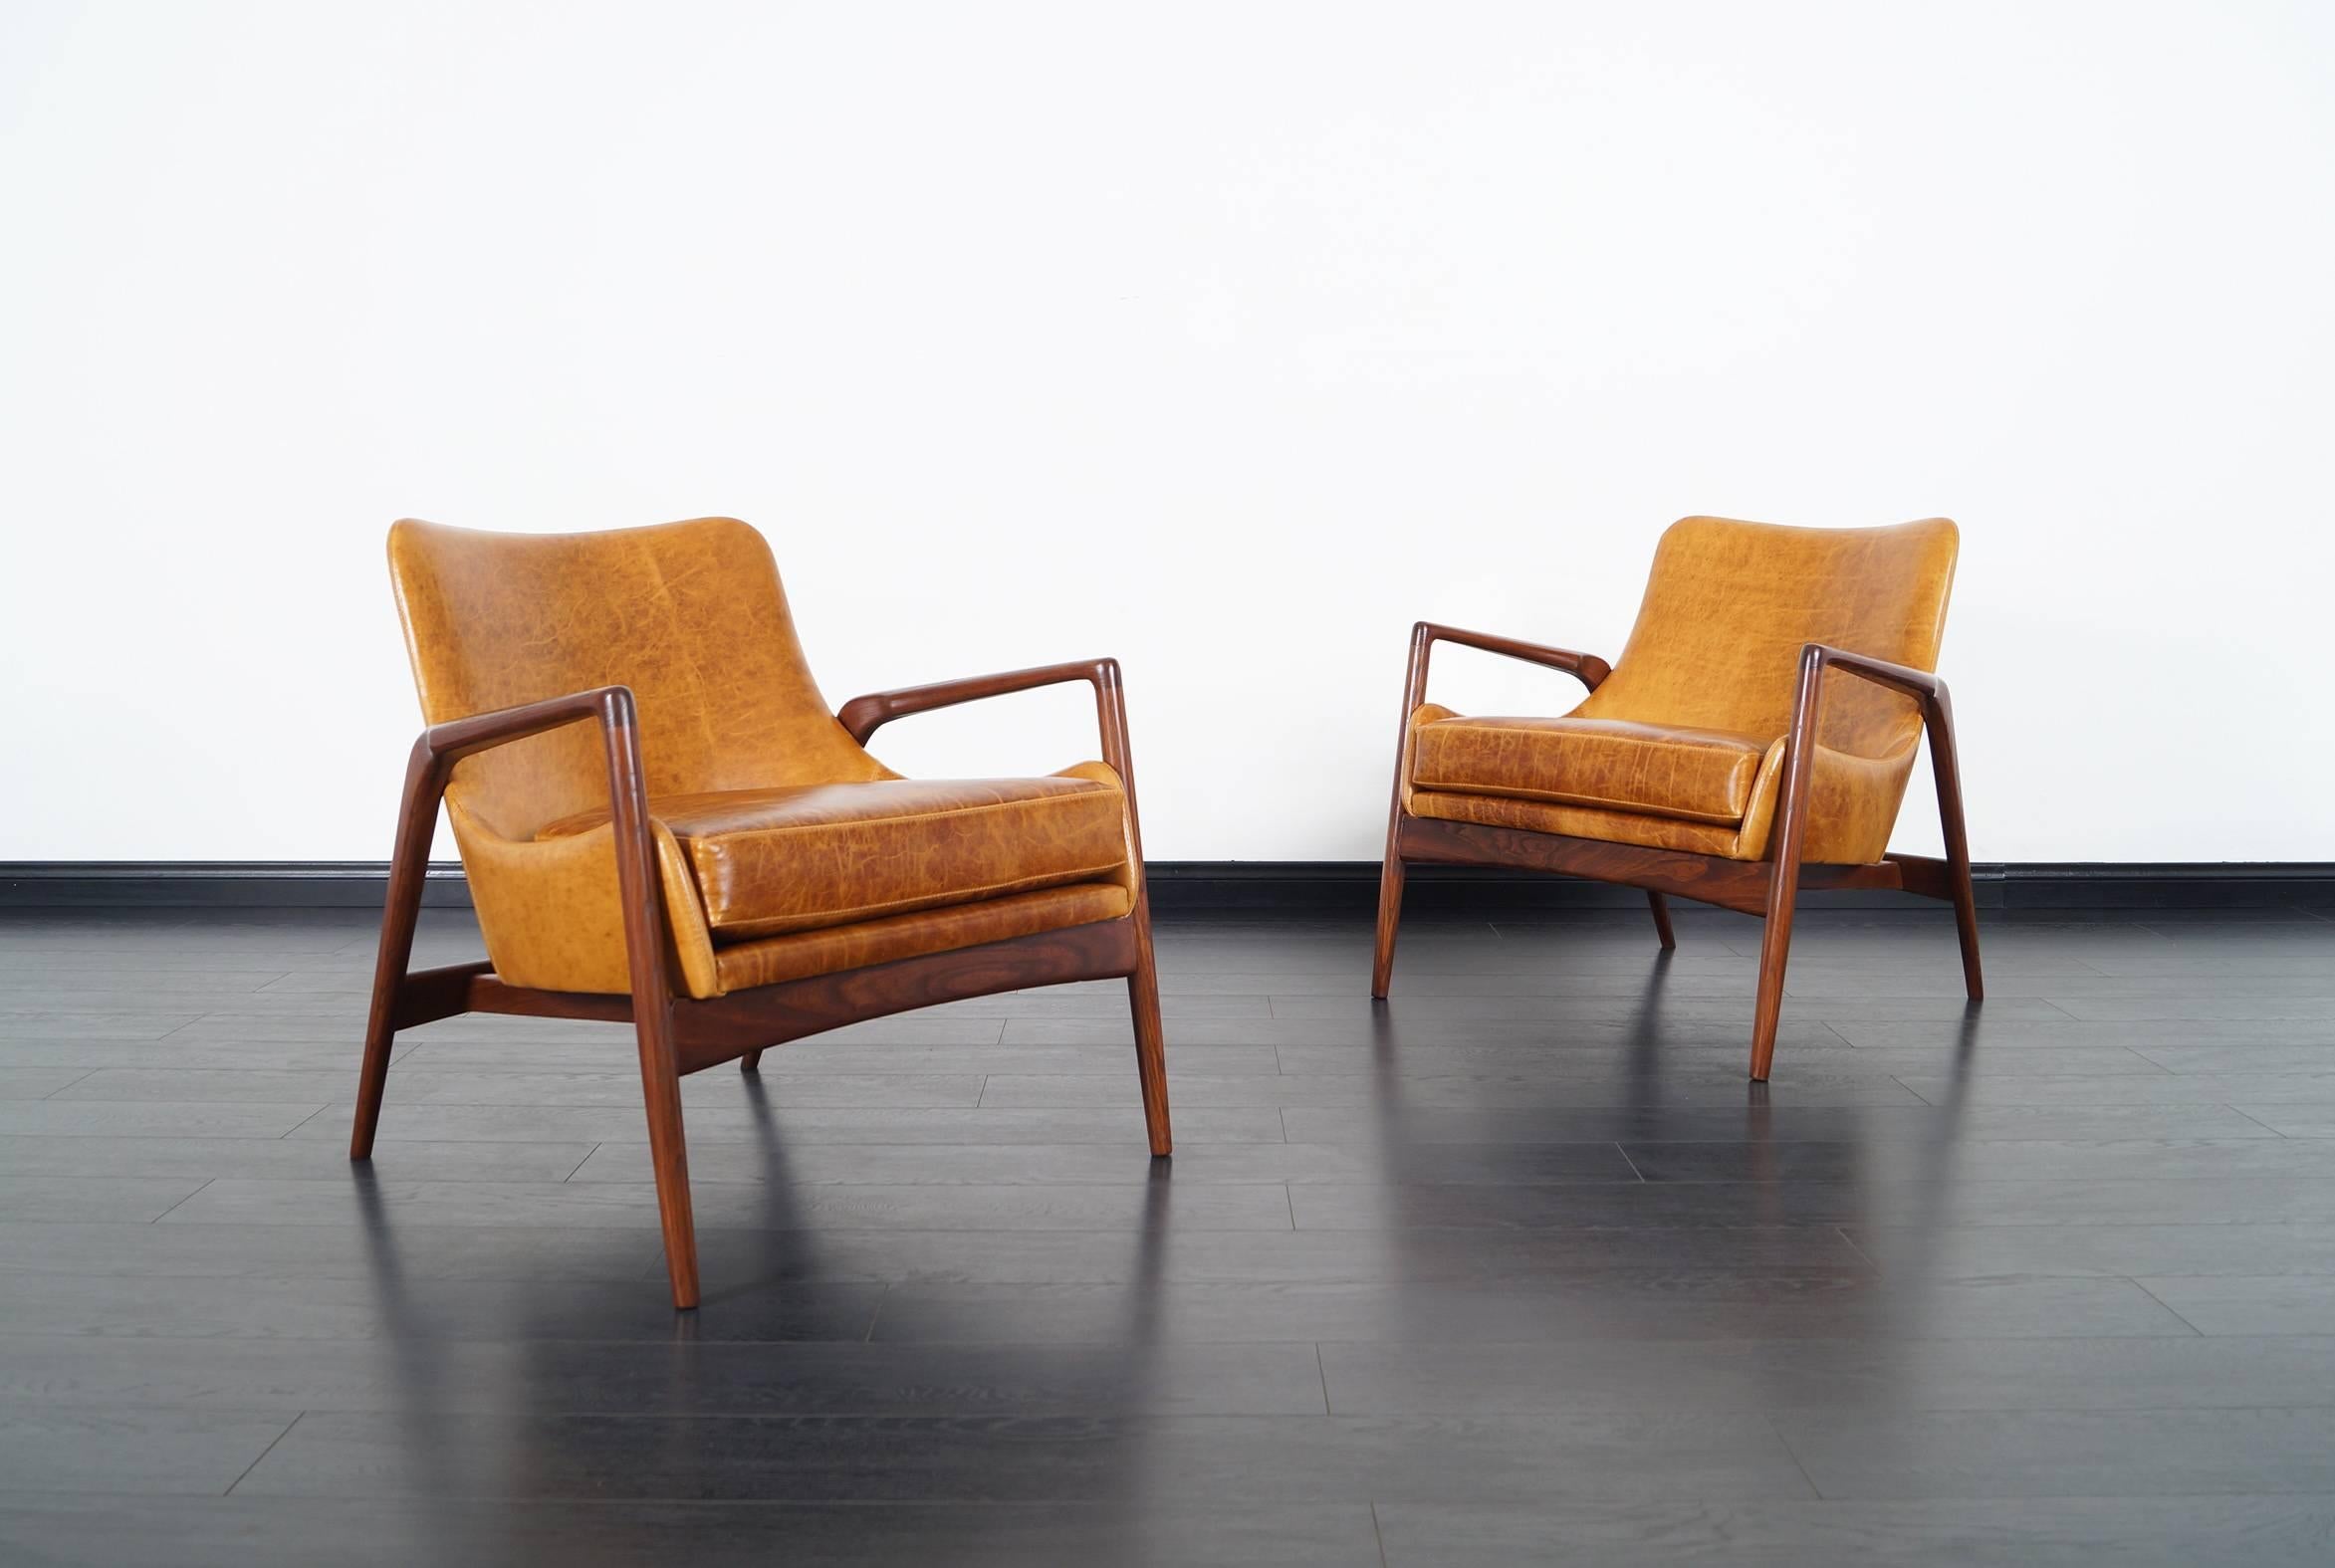 Stunning pair of Danish leather lounge chairs designed by Ib Kofod Larsen. The way the leather shell seat seems to be floating inside the wooden frame, gives the design an amazing feel from any angle.